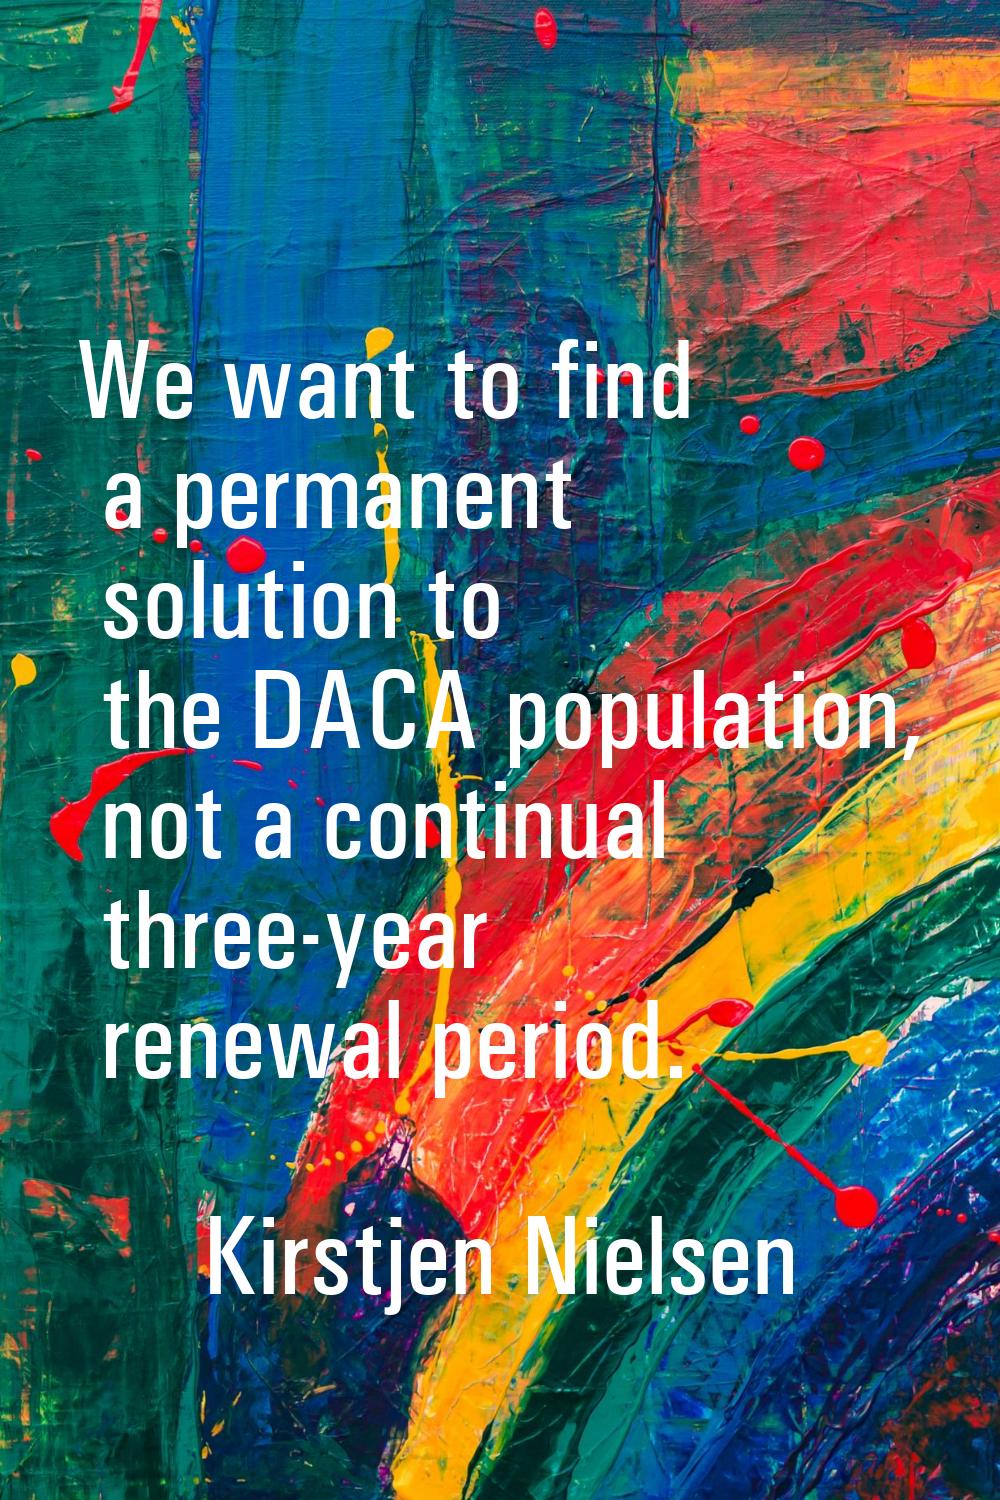 We want to find a permanent solution to the DACA population, not a continual three-year renewal per